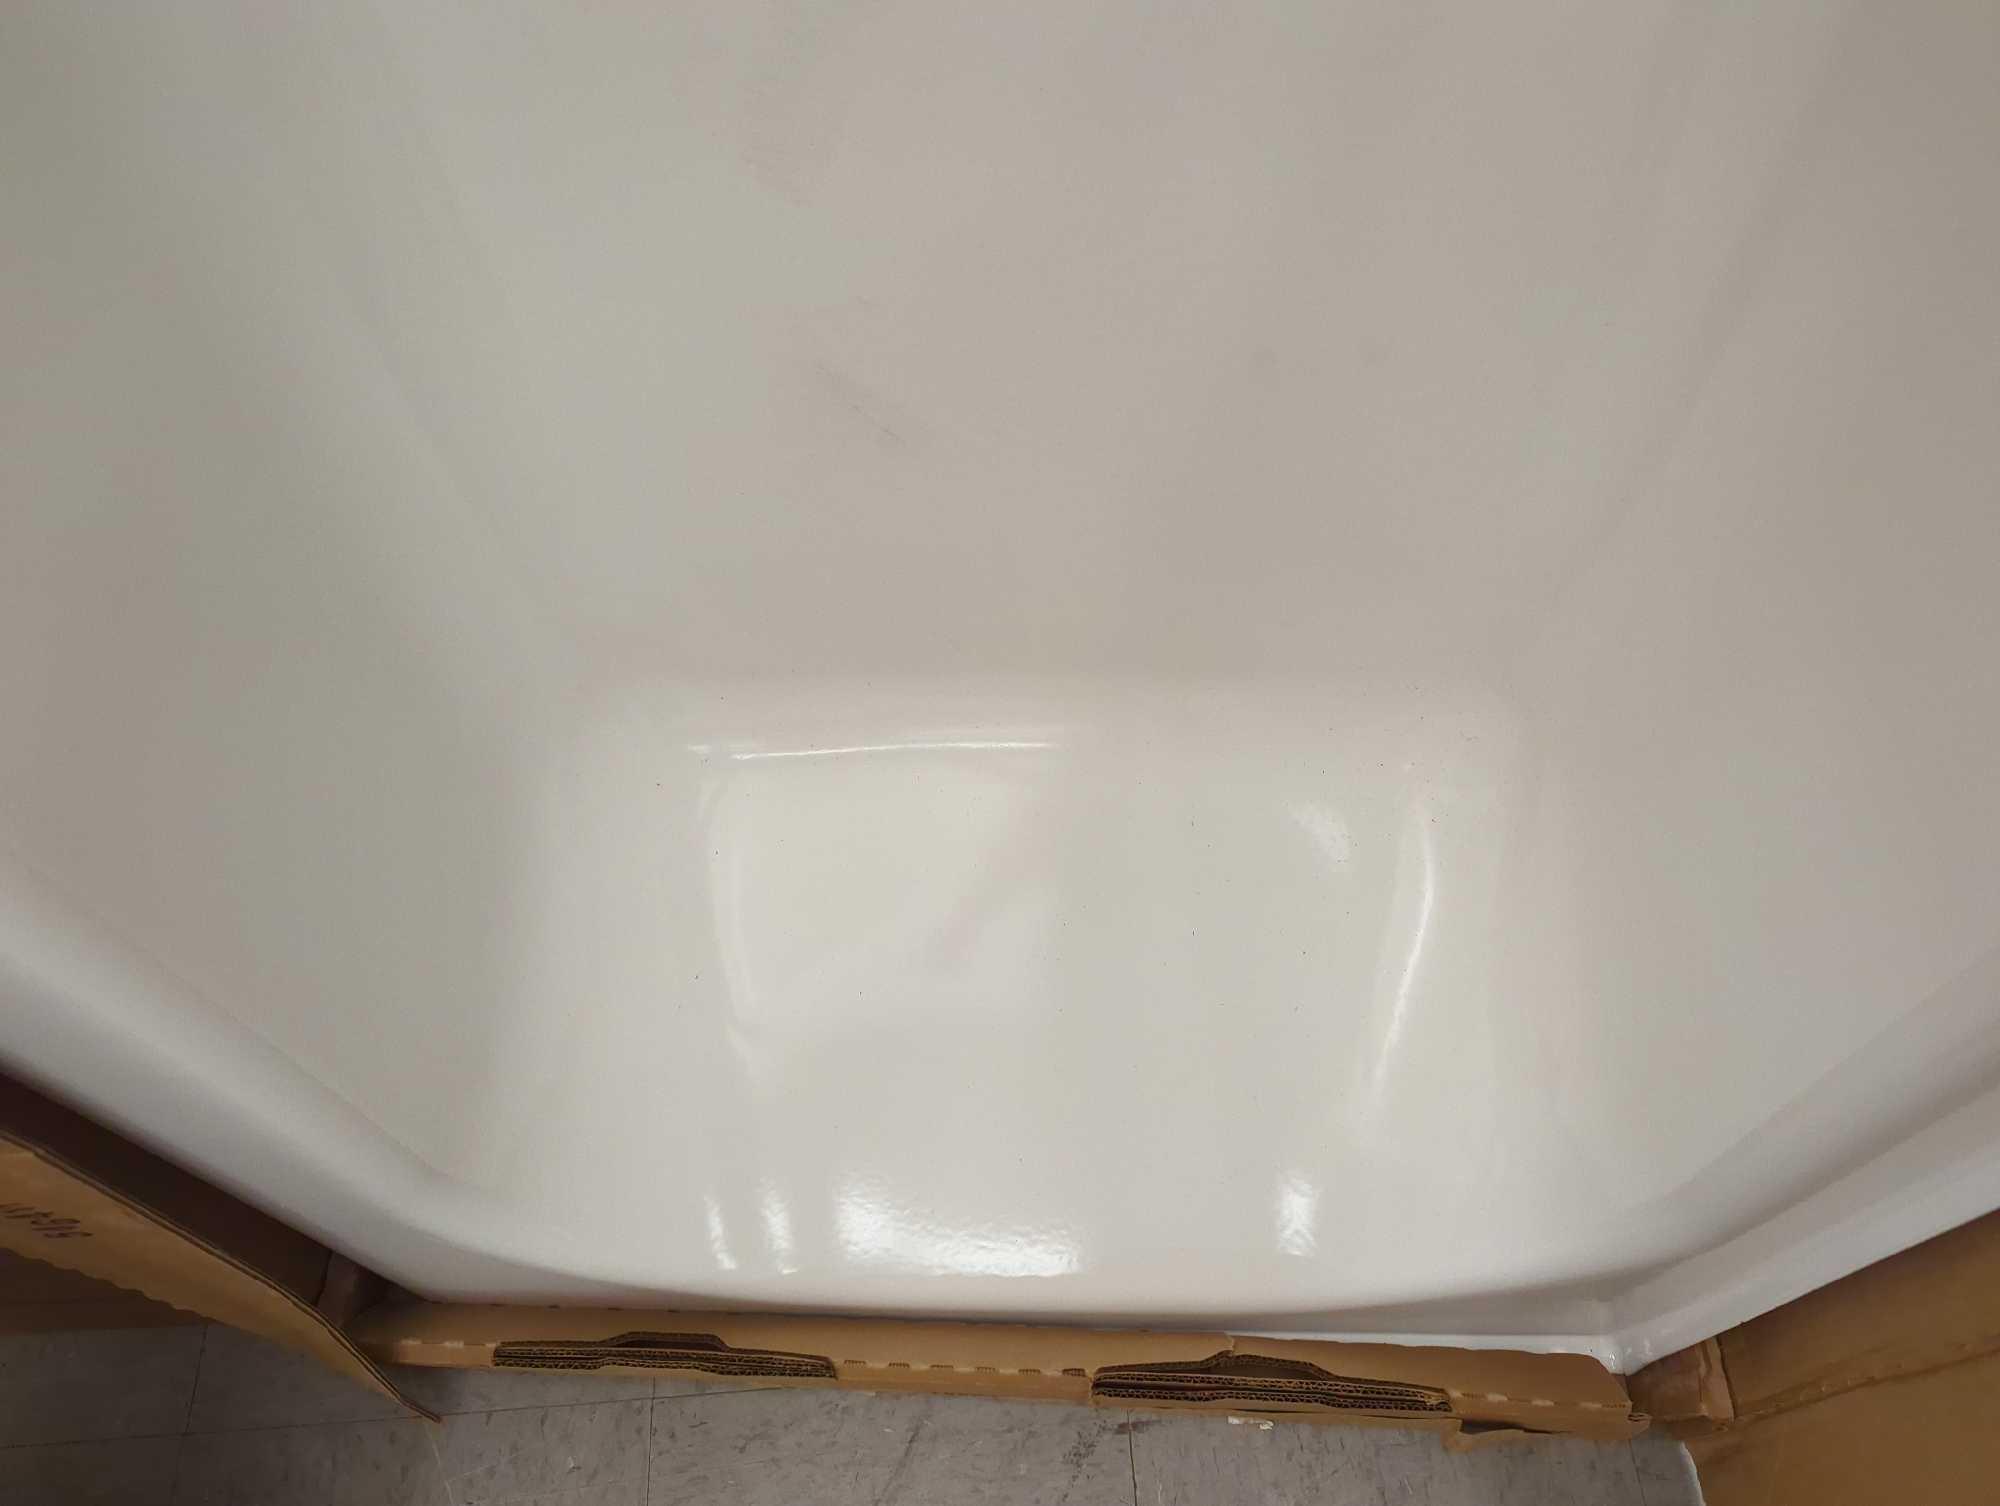 Bootz Industries Aloha 60 in. x 30 in. Soaking Bathtub with Left Drain in White, Appears to be New